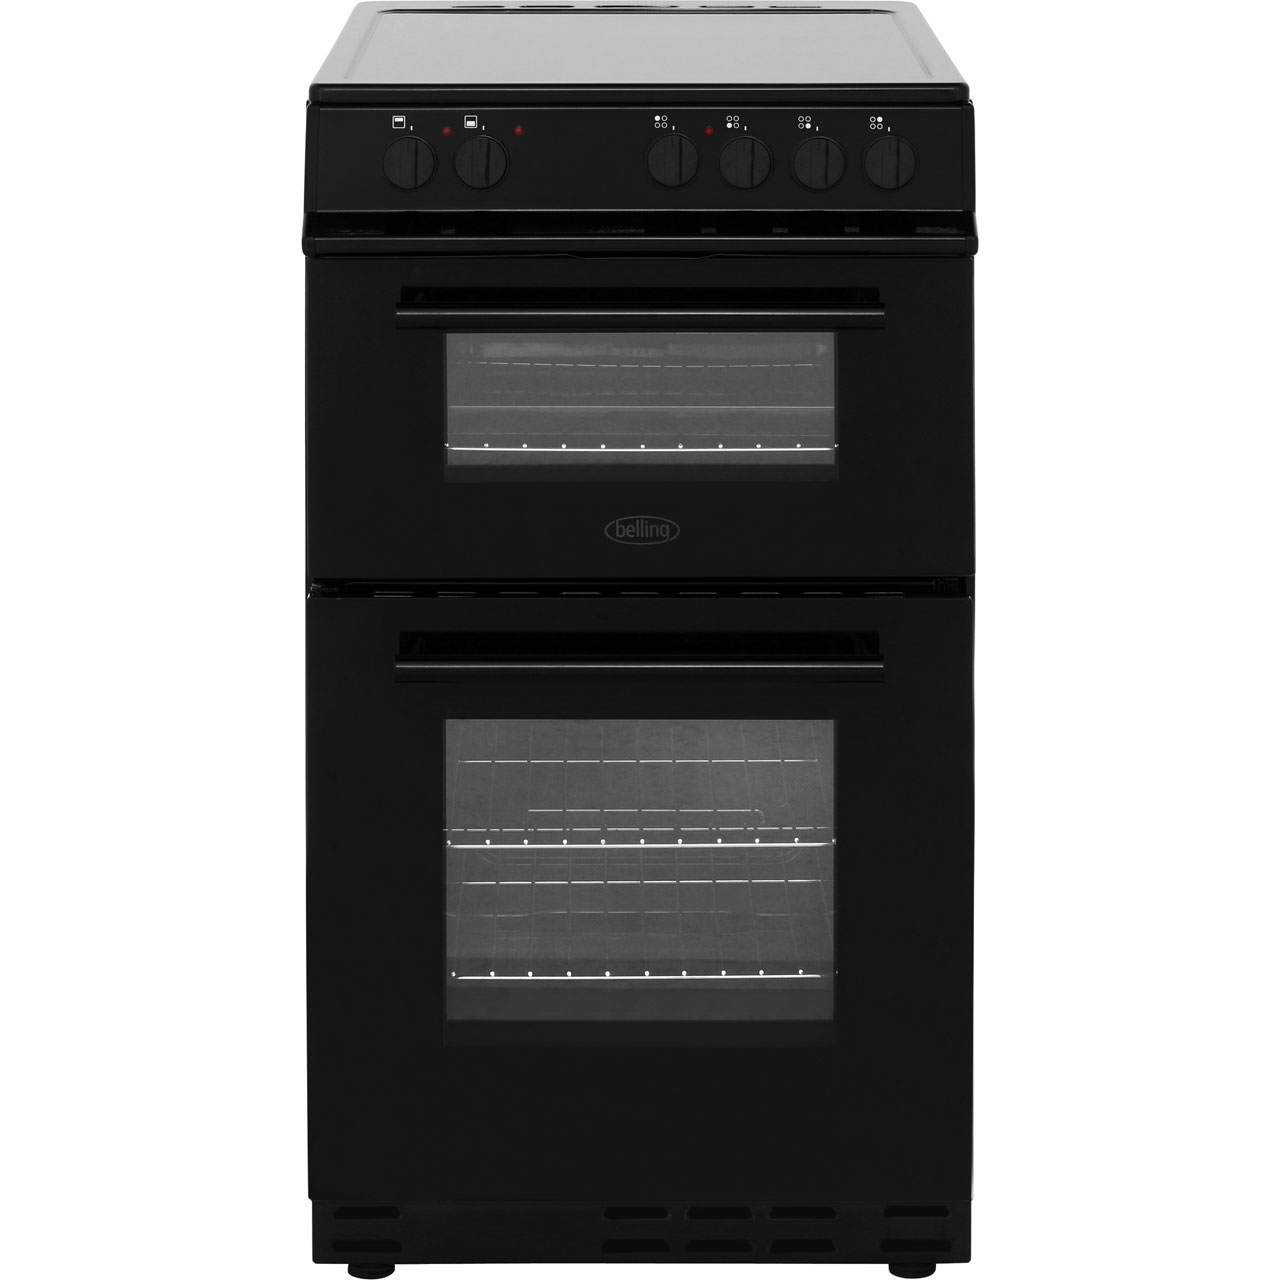 Belling FS50EDOC Free Standing Cooker in Black